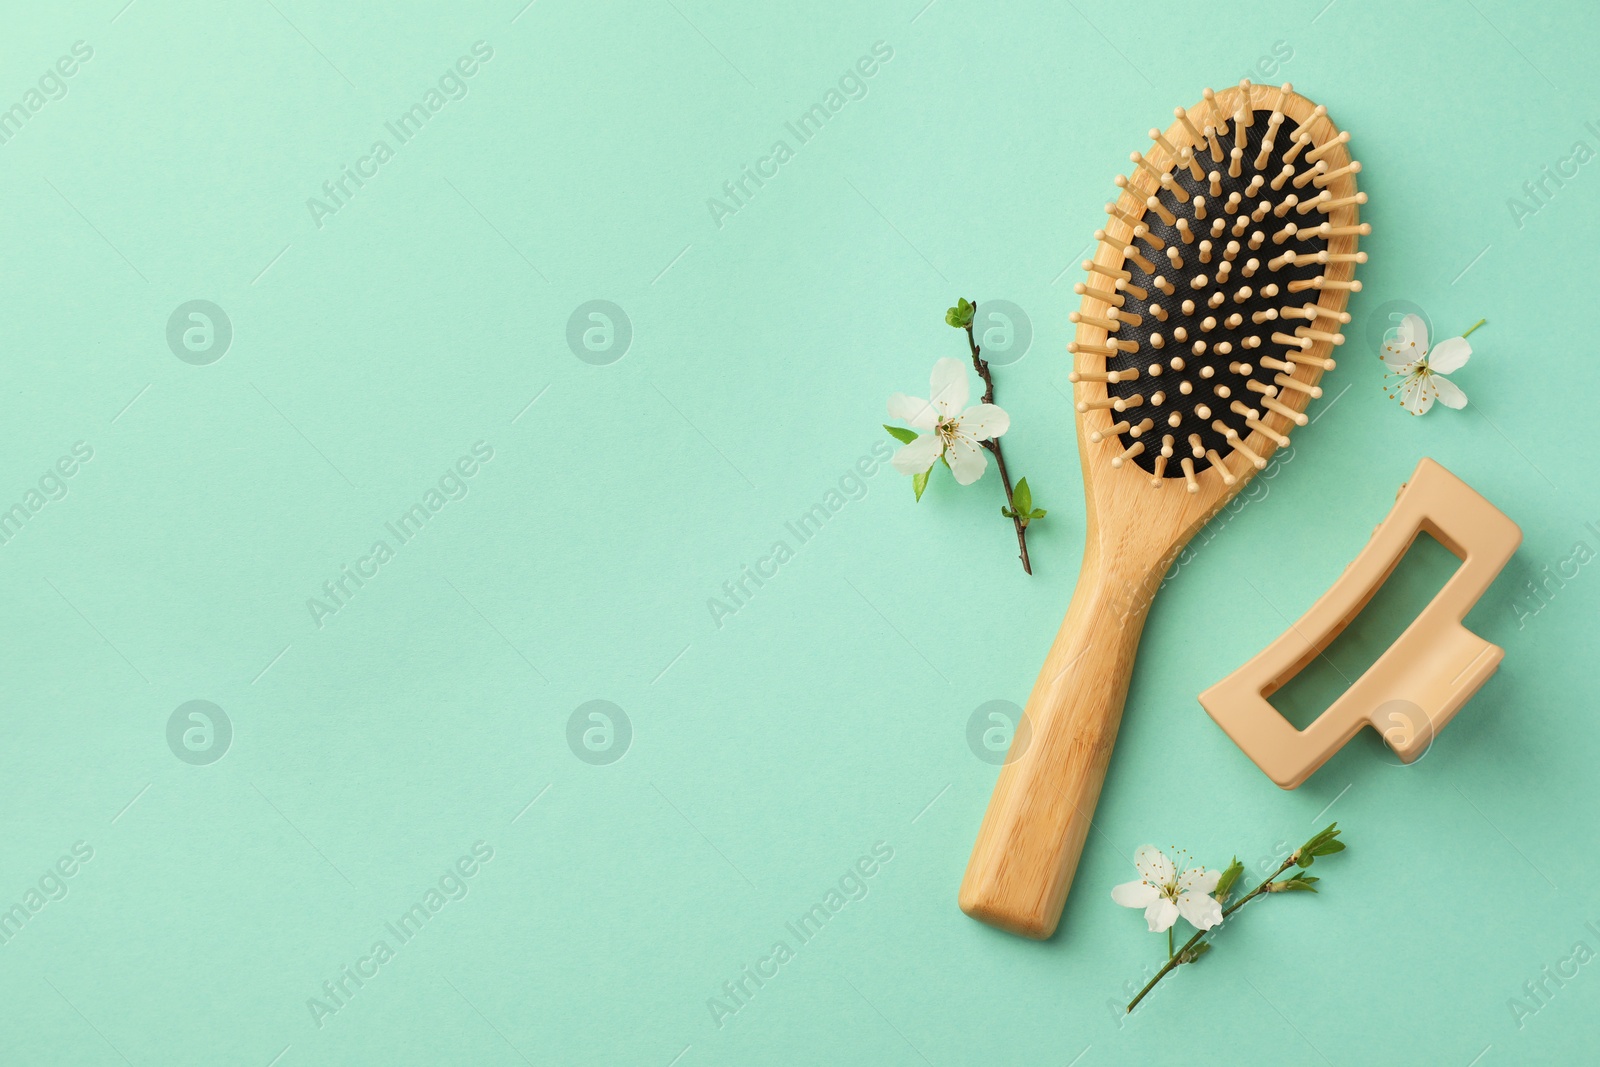 Photo of Wooden hairbrush, flower branches and barrette on turquoise background, flat lay. Space for text